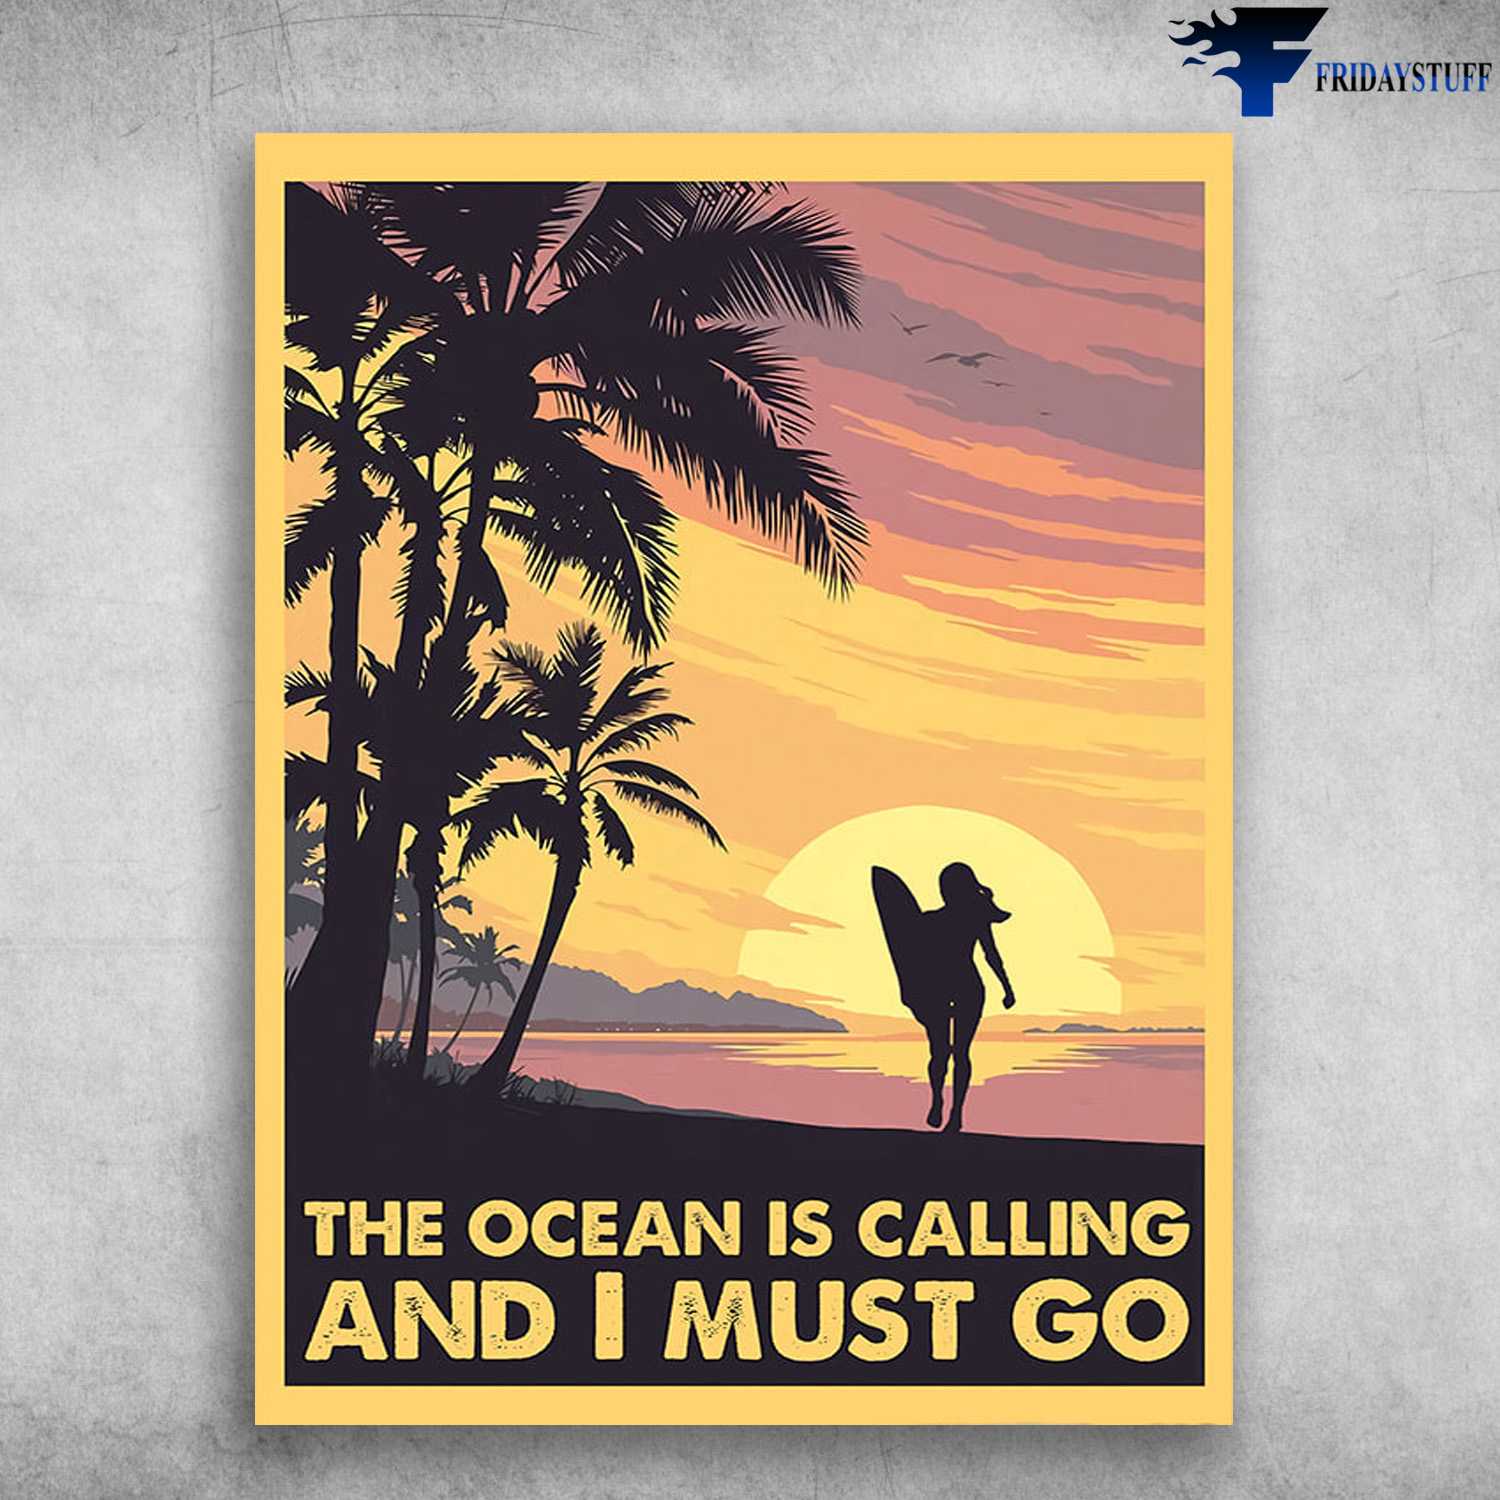 Go To The Beach, Surfing Poster - The Ocean Is Calling, And I Must Go